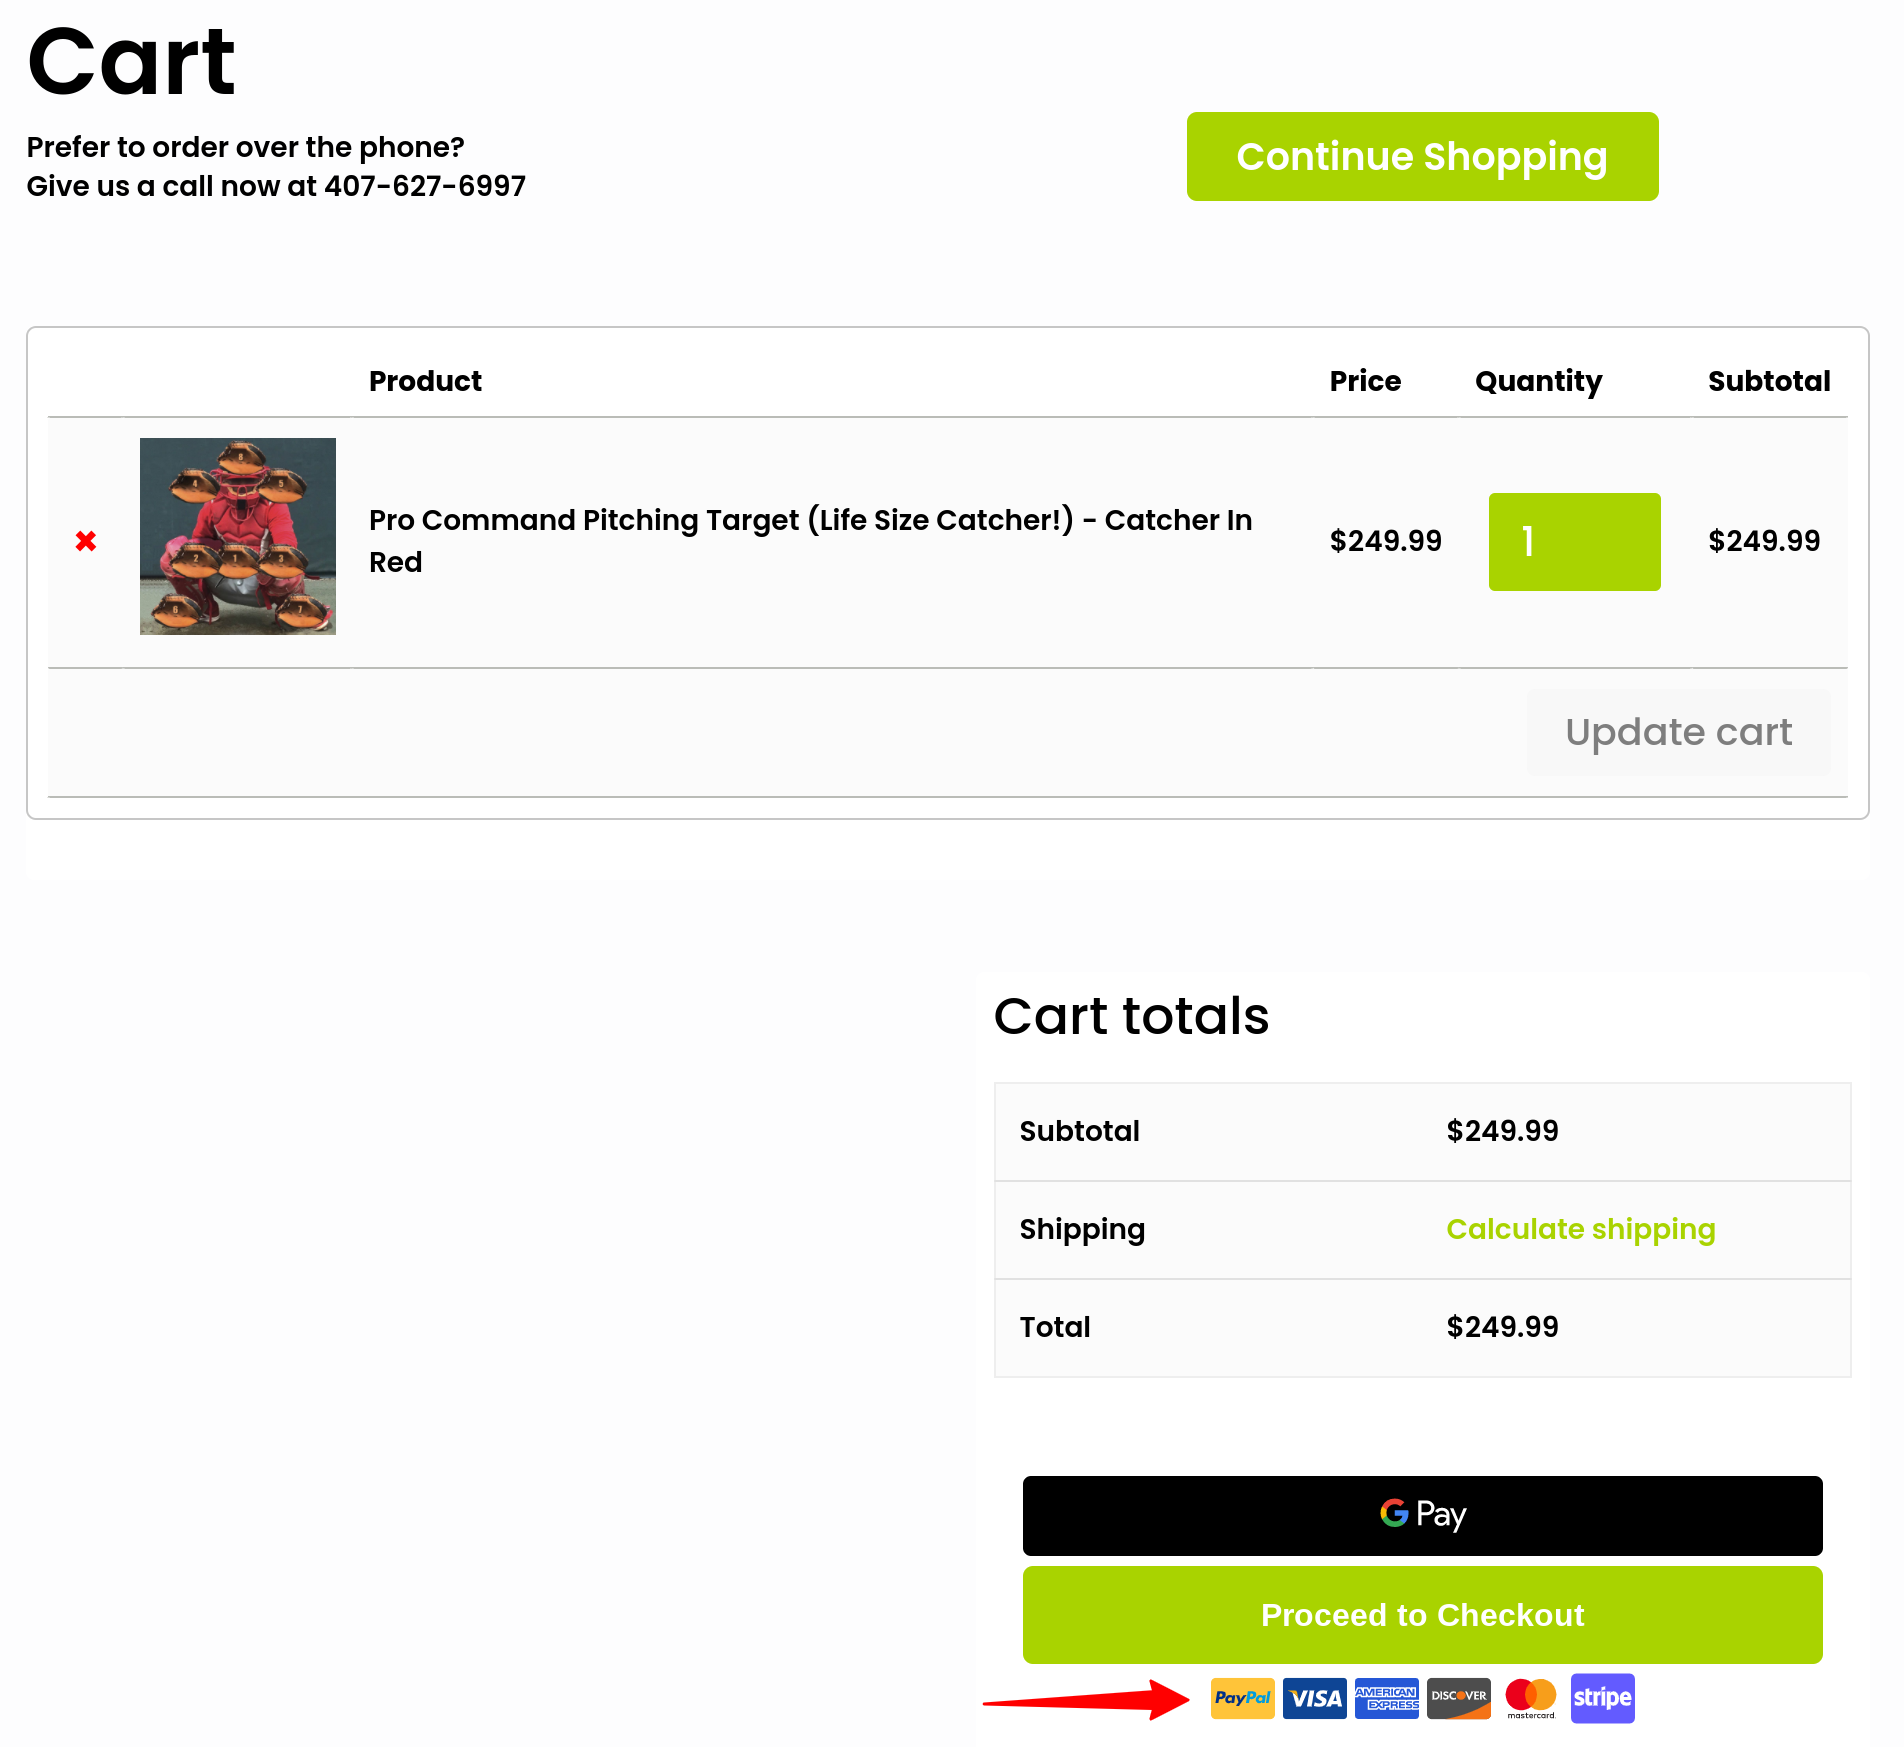 A WooCommerce store running a PeachPay checkout